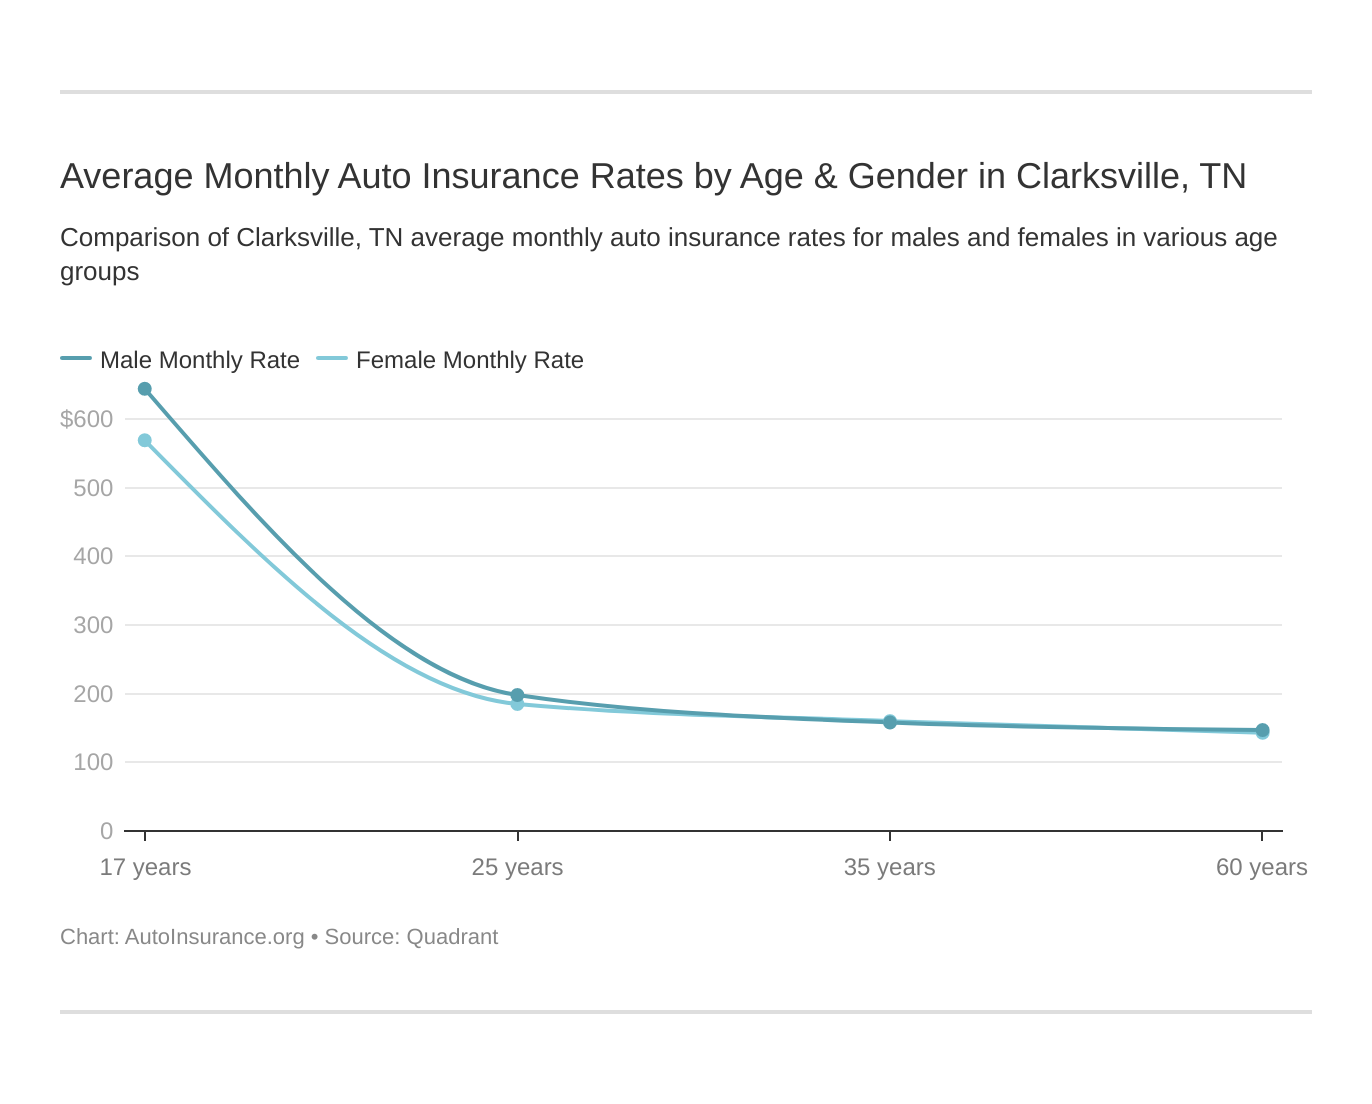 Average Monthly Auto Insurance Rates by Age & Gender in Clarksville, TN